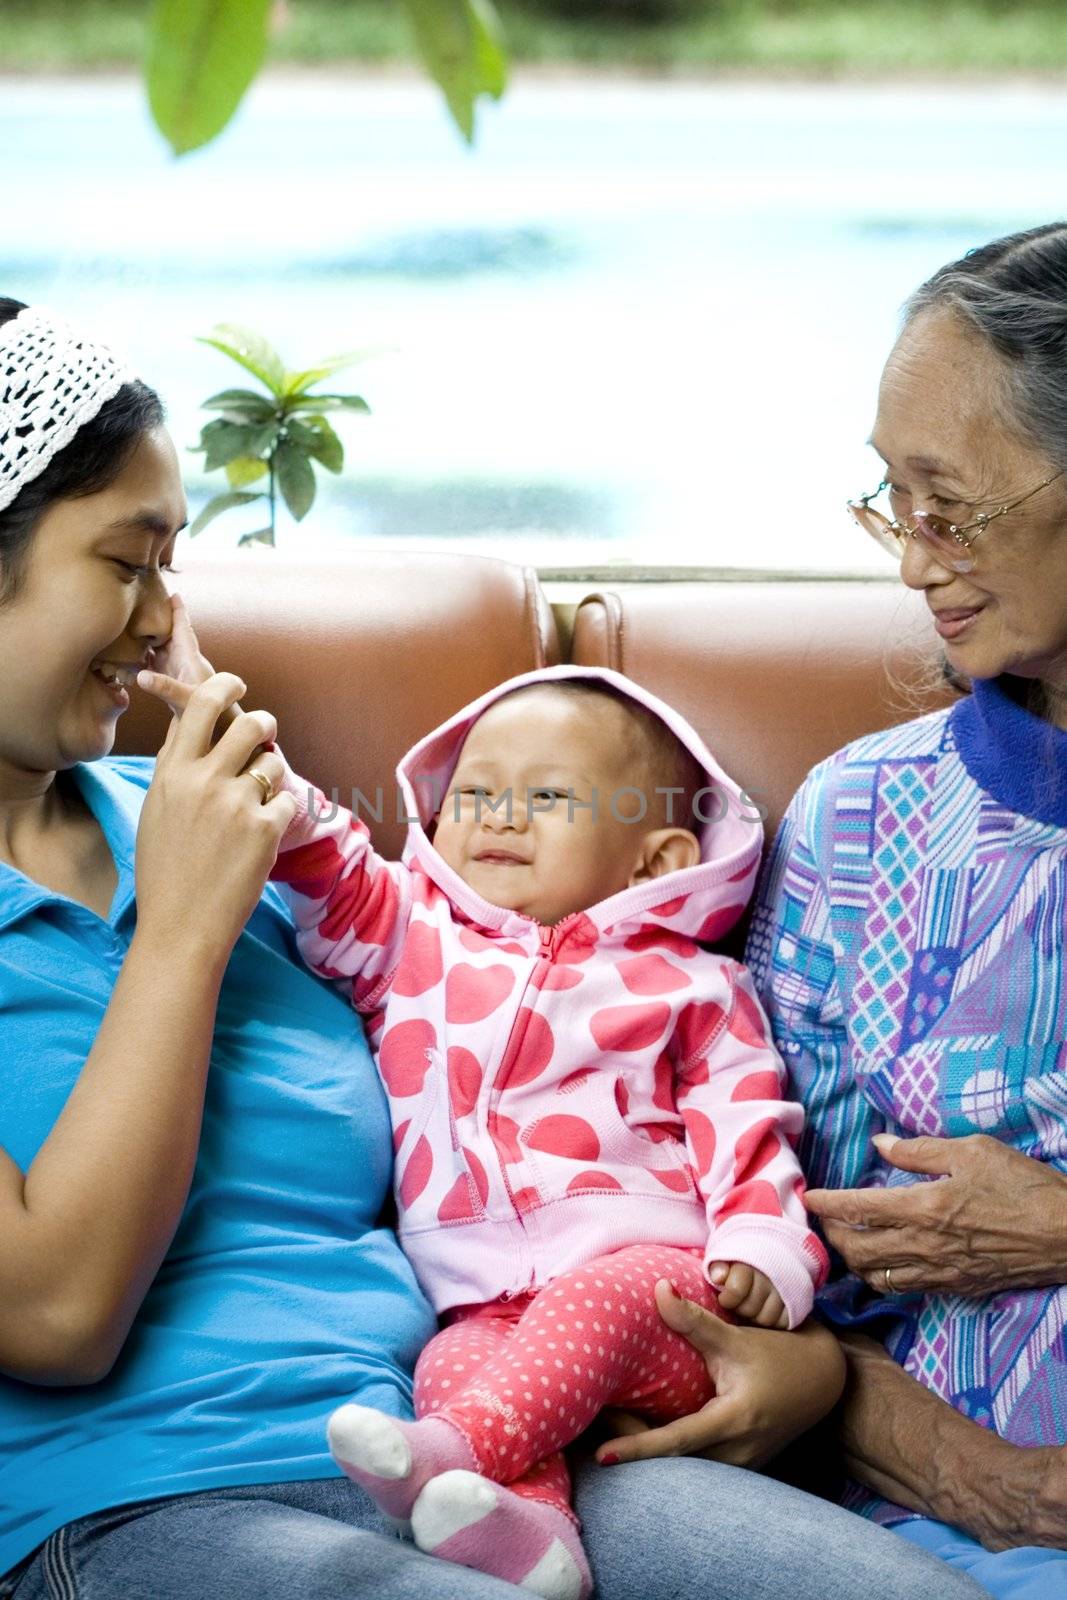 photo of 3 generation woman: a baby, mom and grandma having a good time together - happy family